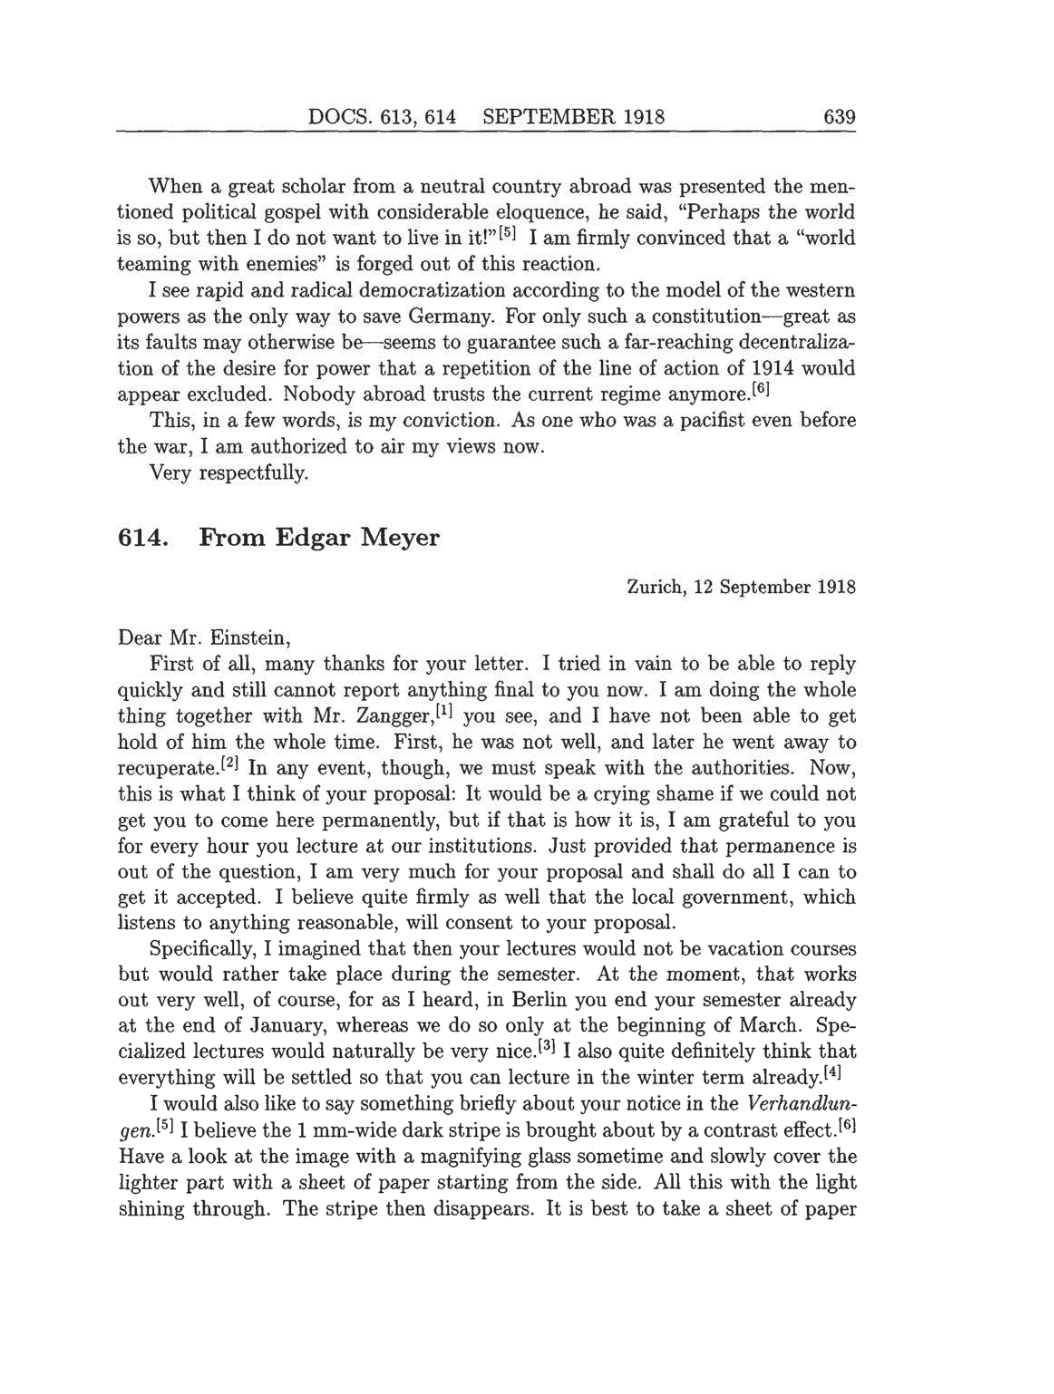 Volume 8: The Berlin Years: Correspondence, 1914-1918 (English translation supplement) page 639